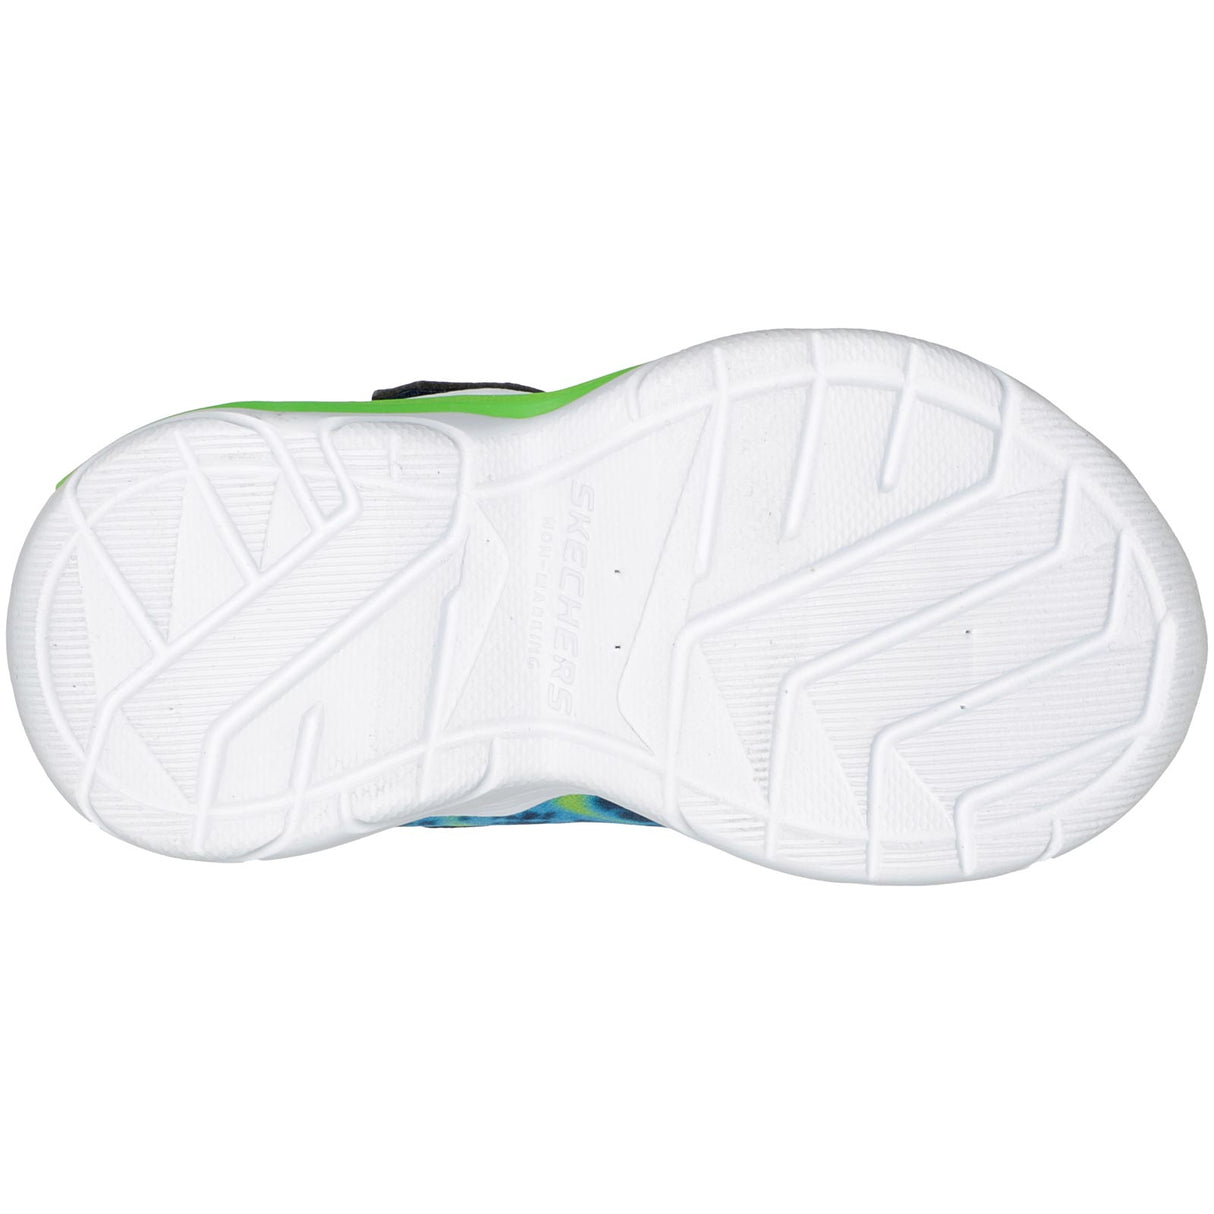 Skechers Erupters IV Infant Kids Trainers